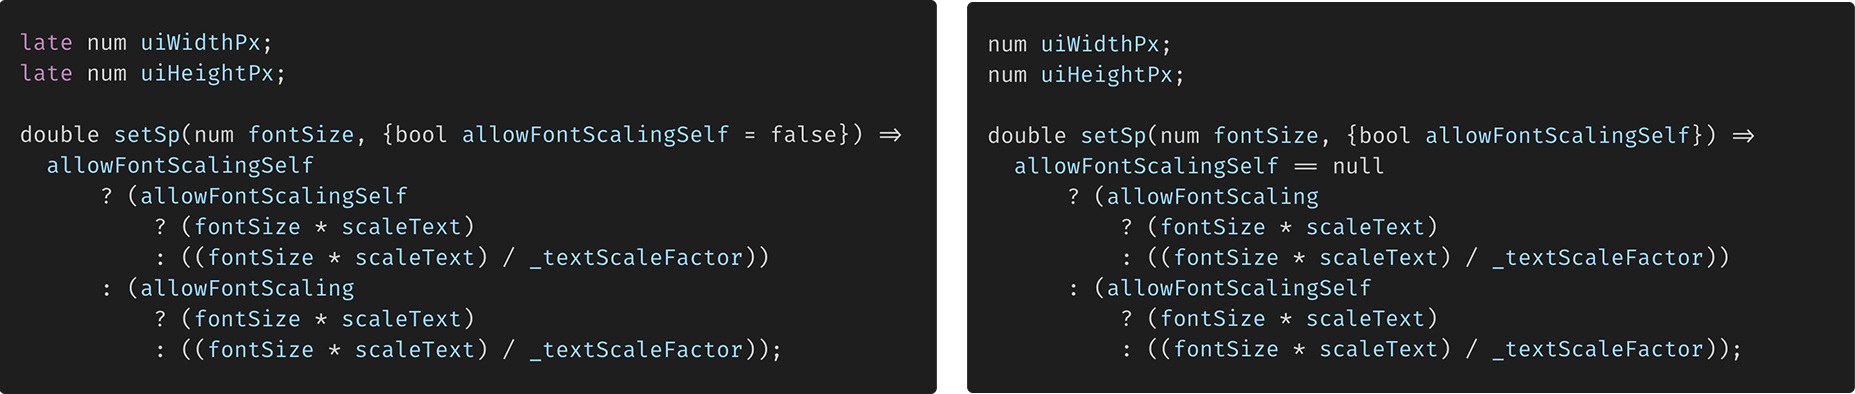 not_initialized_non_nullable_instance_field_screenutil_comparison.png